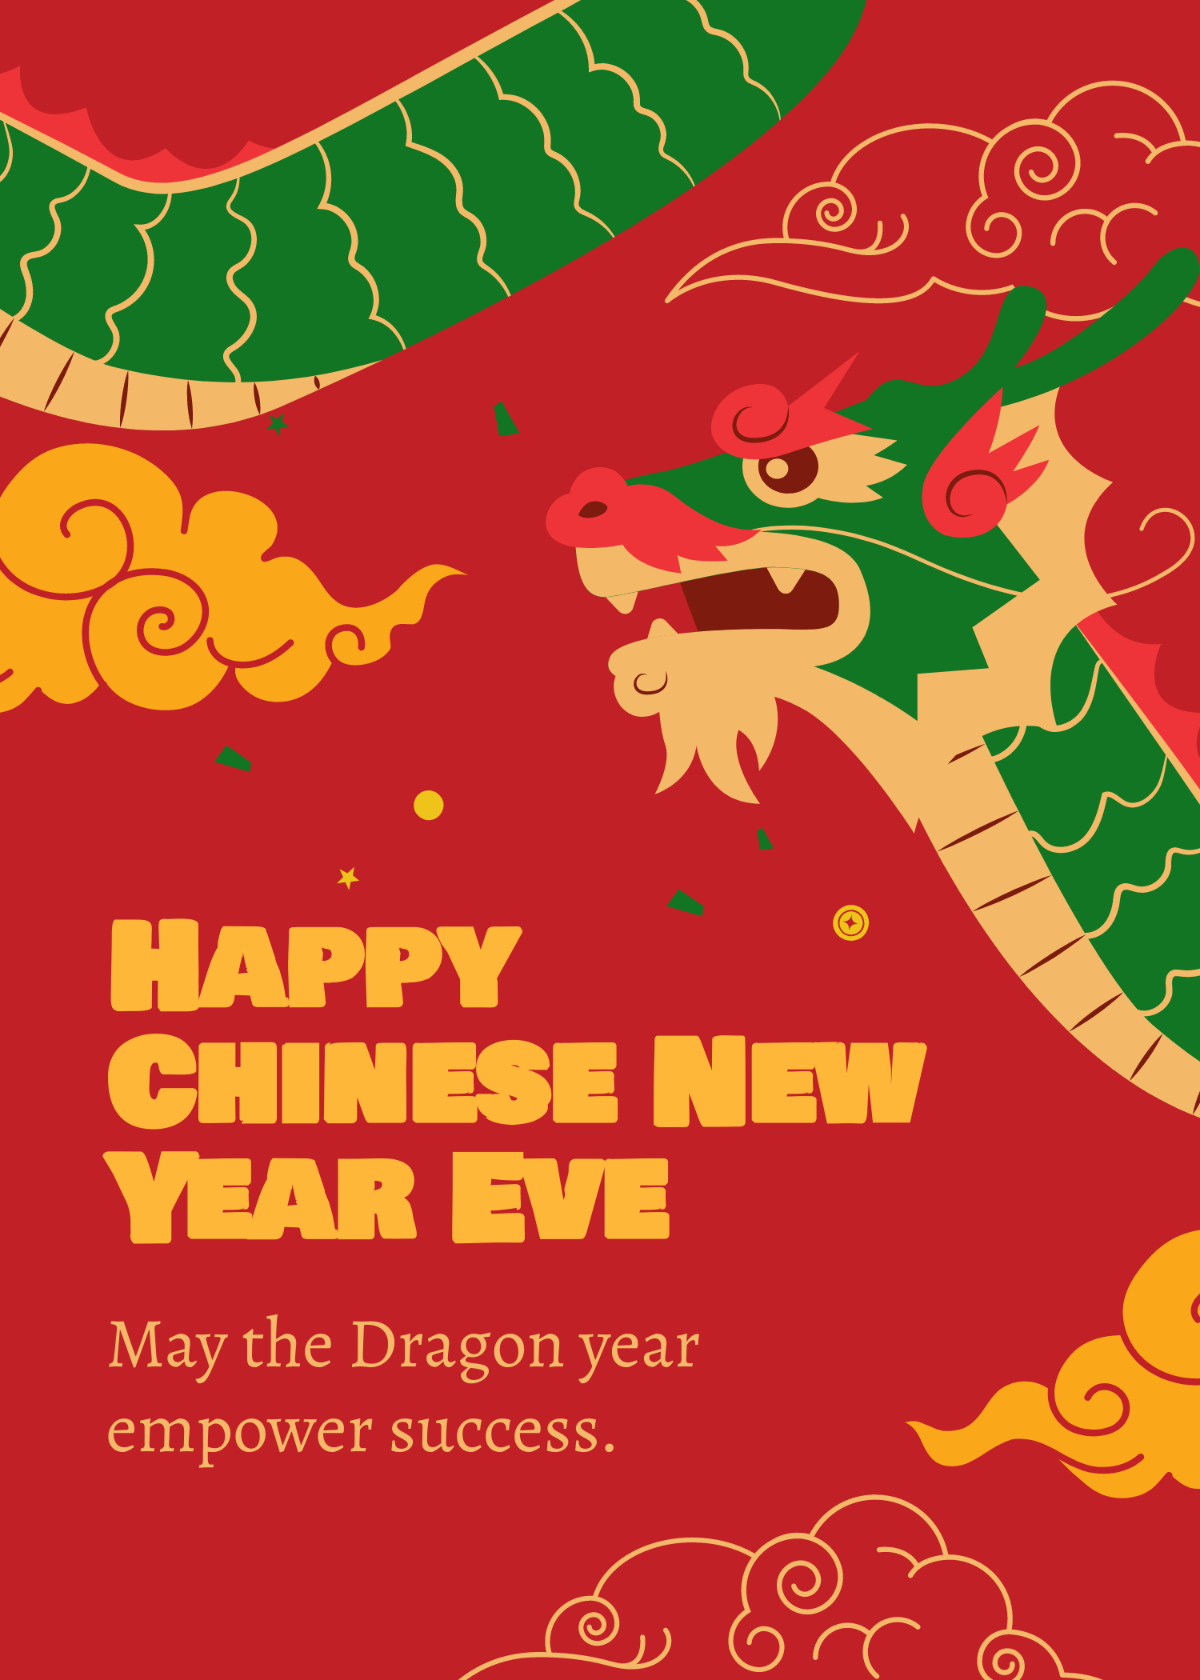 Chinese New Year Eve Greeting Card Template